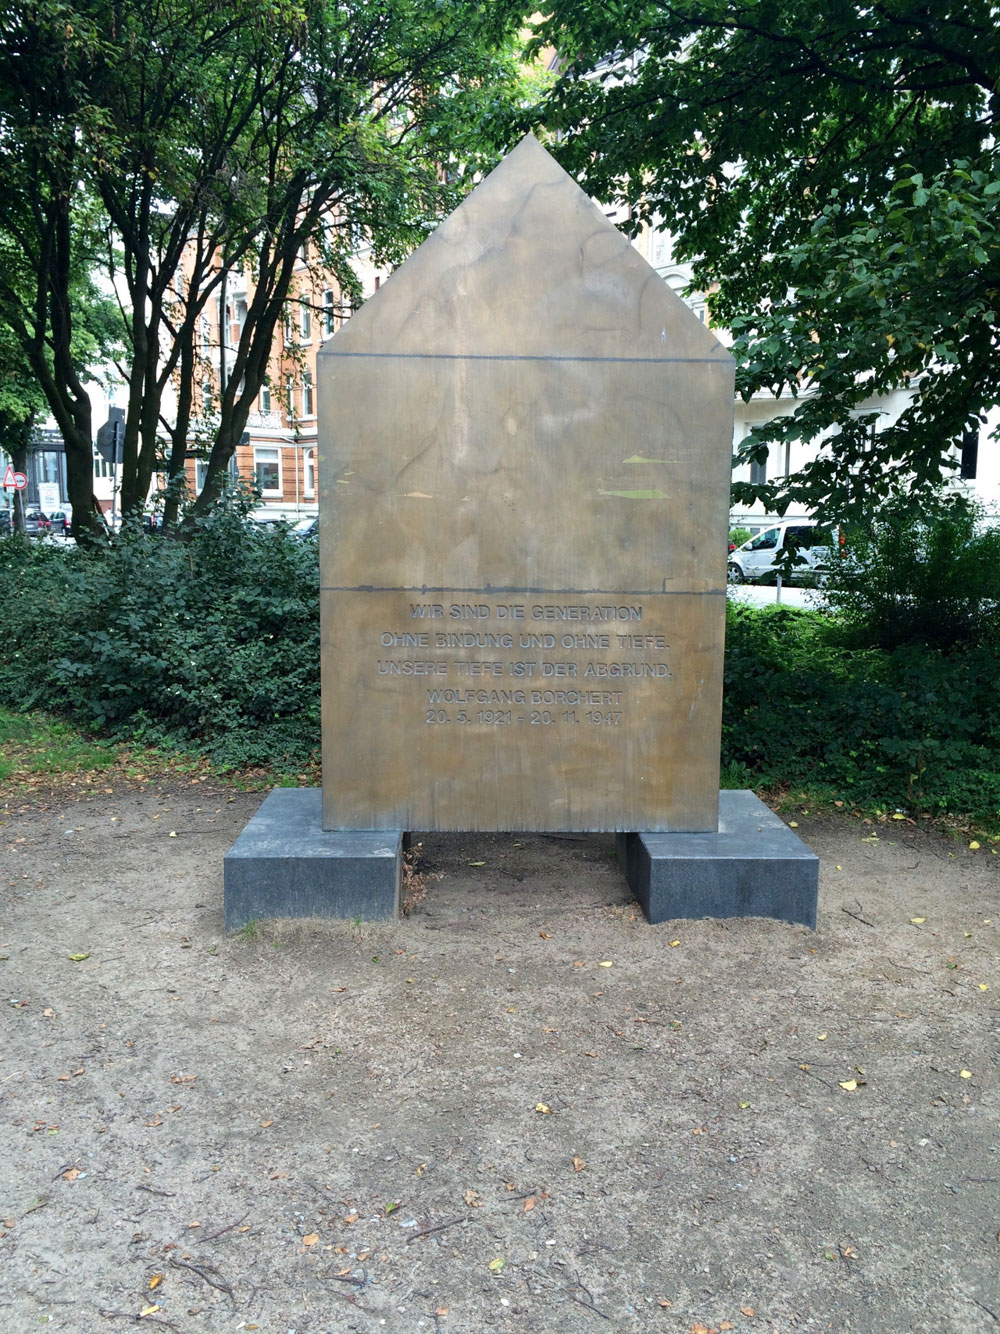 The Wolfgang Borchert monument on the banks of the Alster